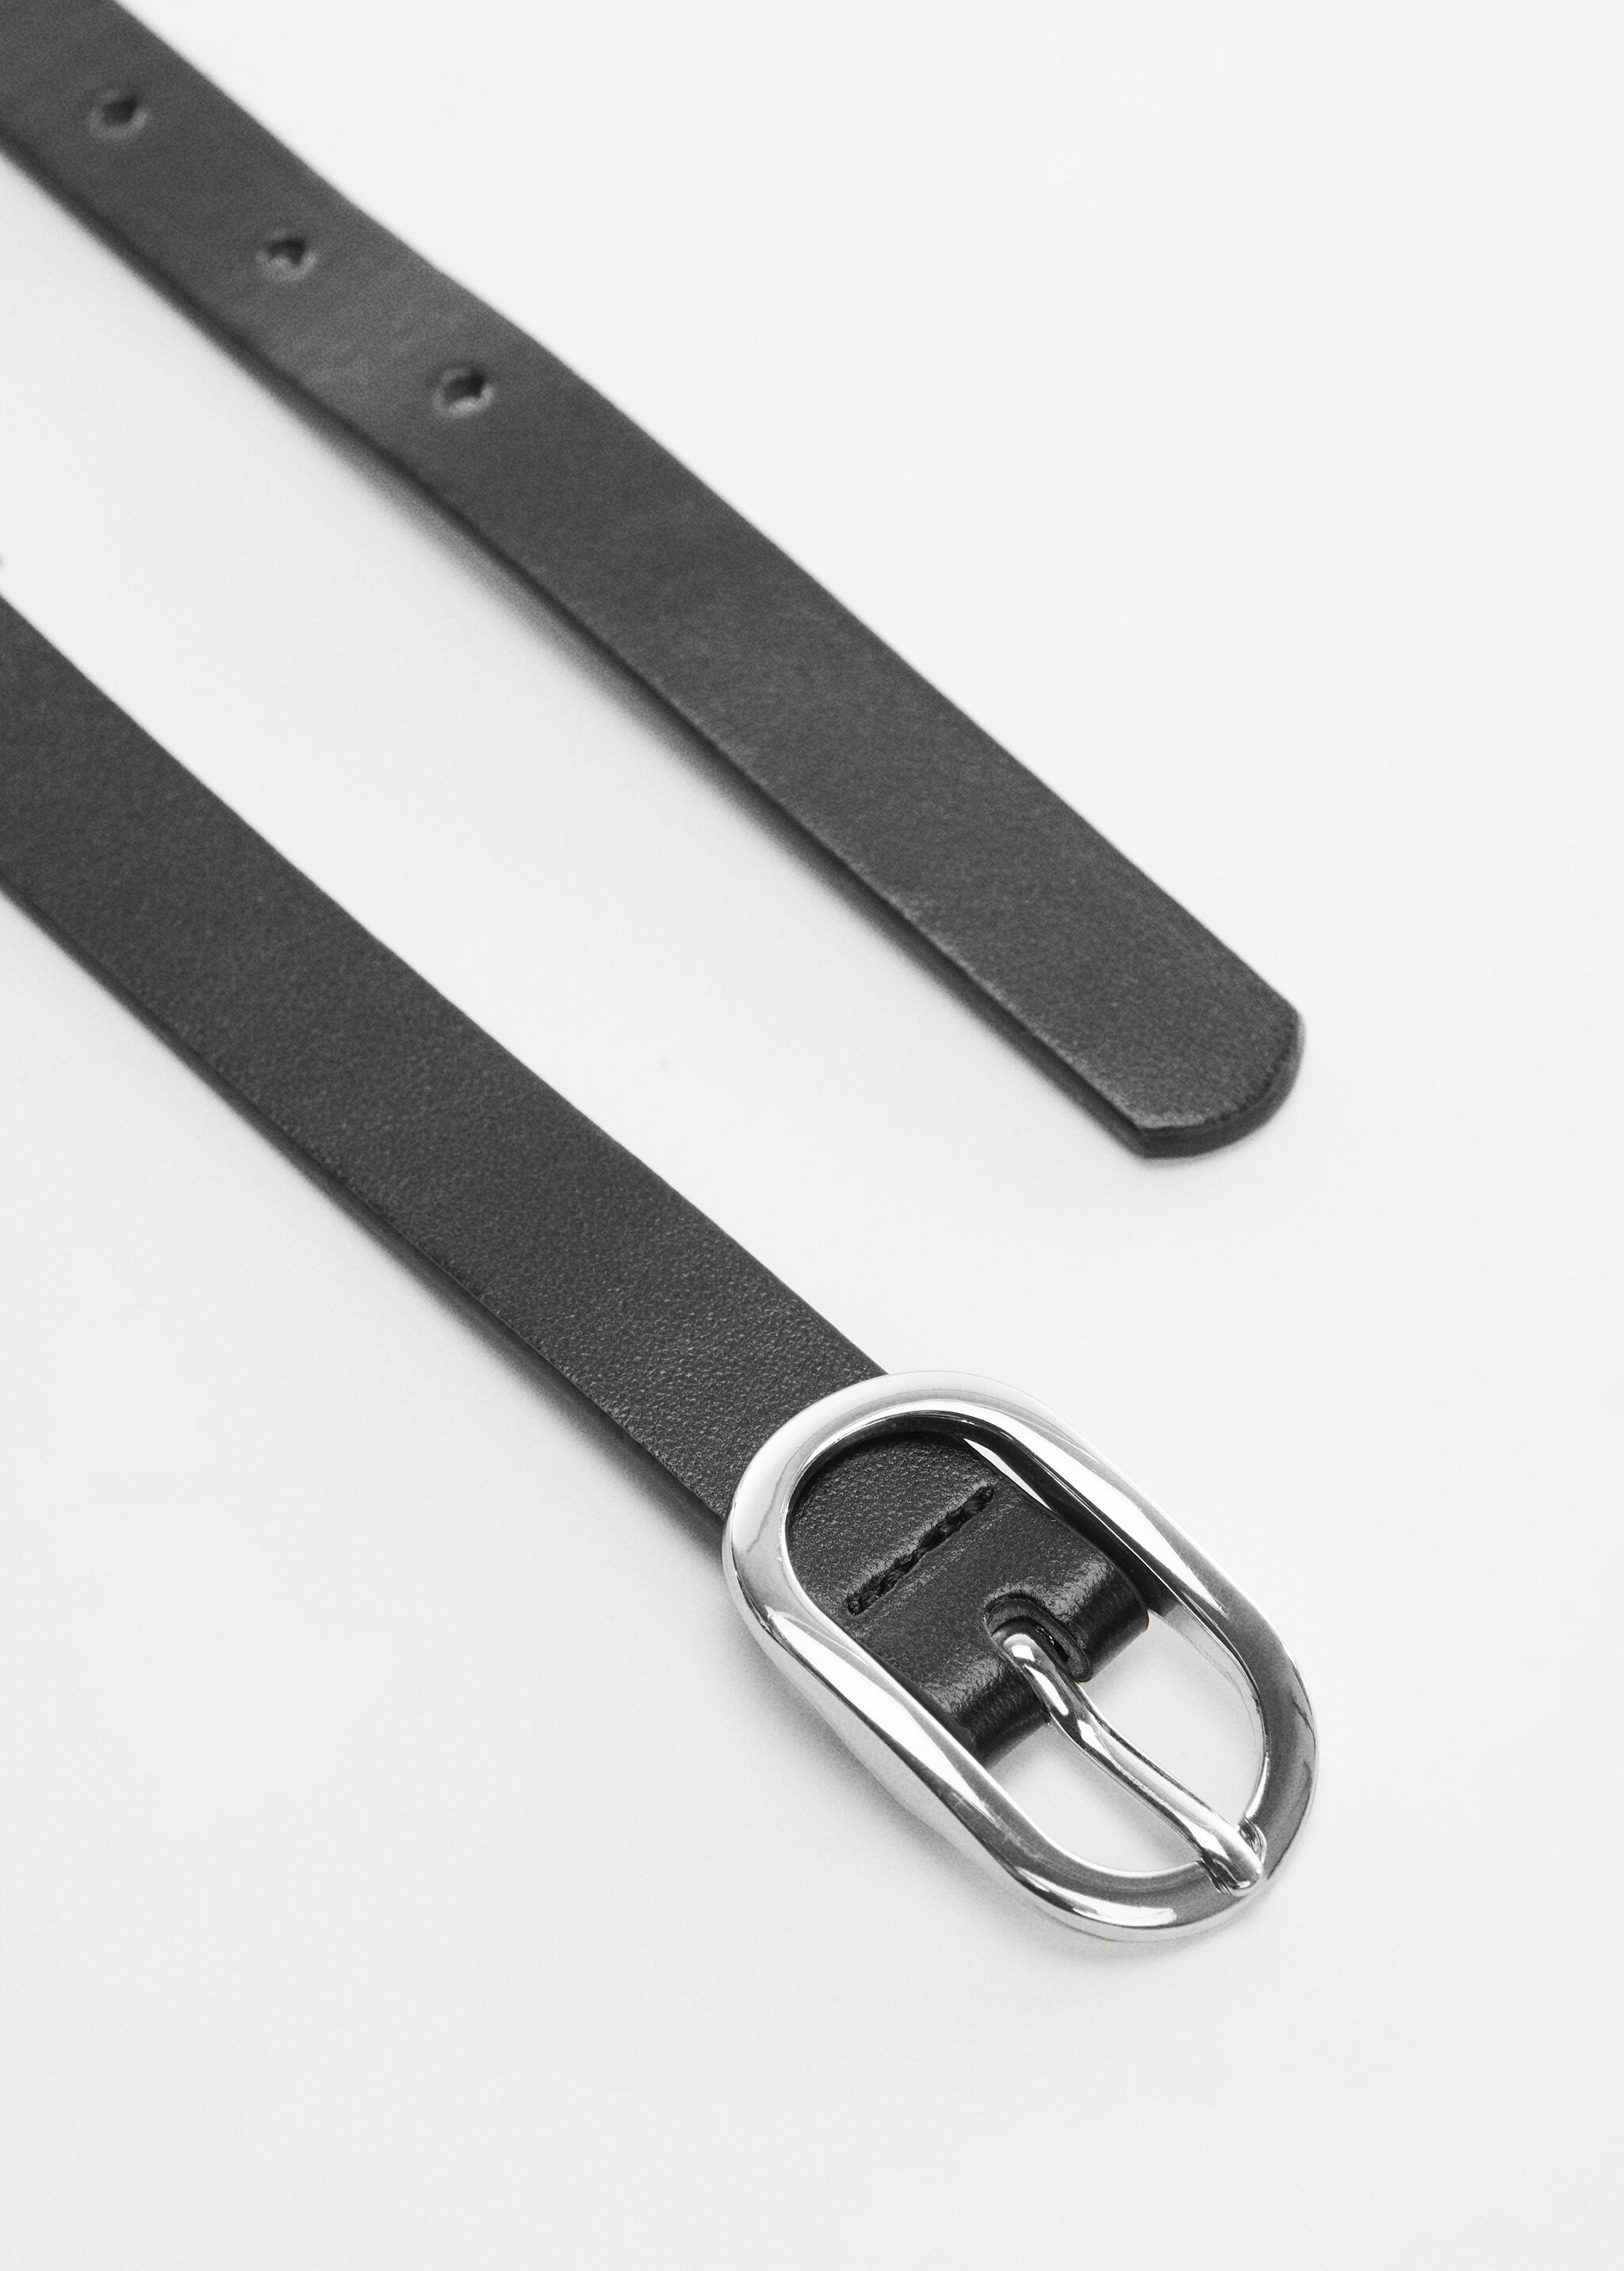 Oval buckle belt - Details of the article 2